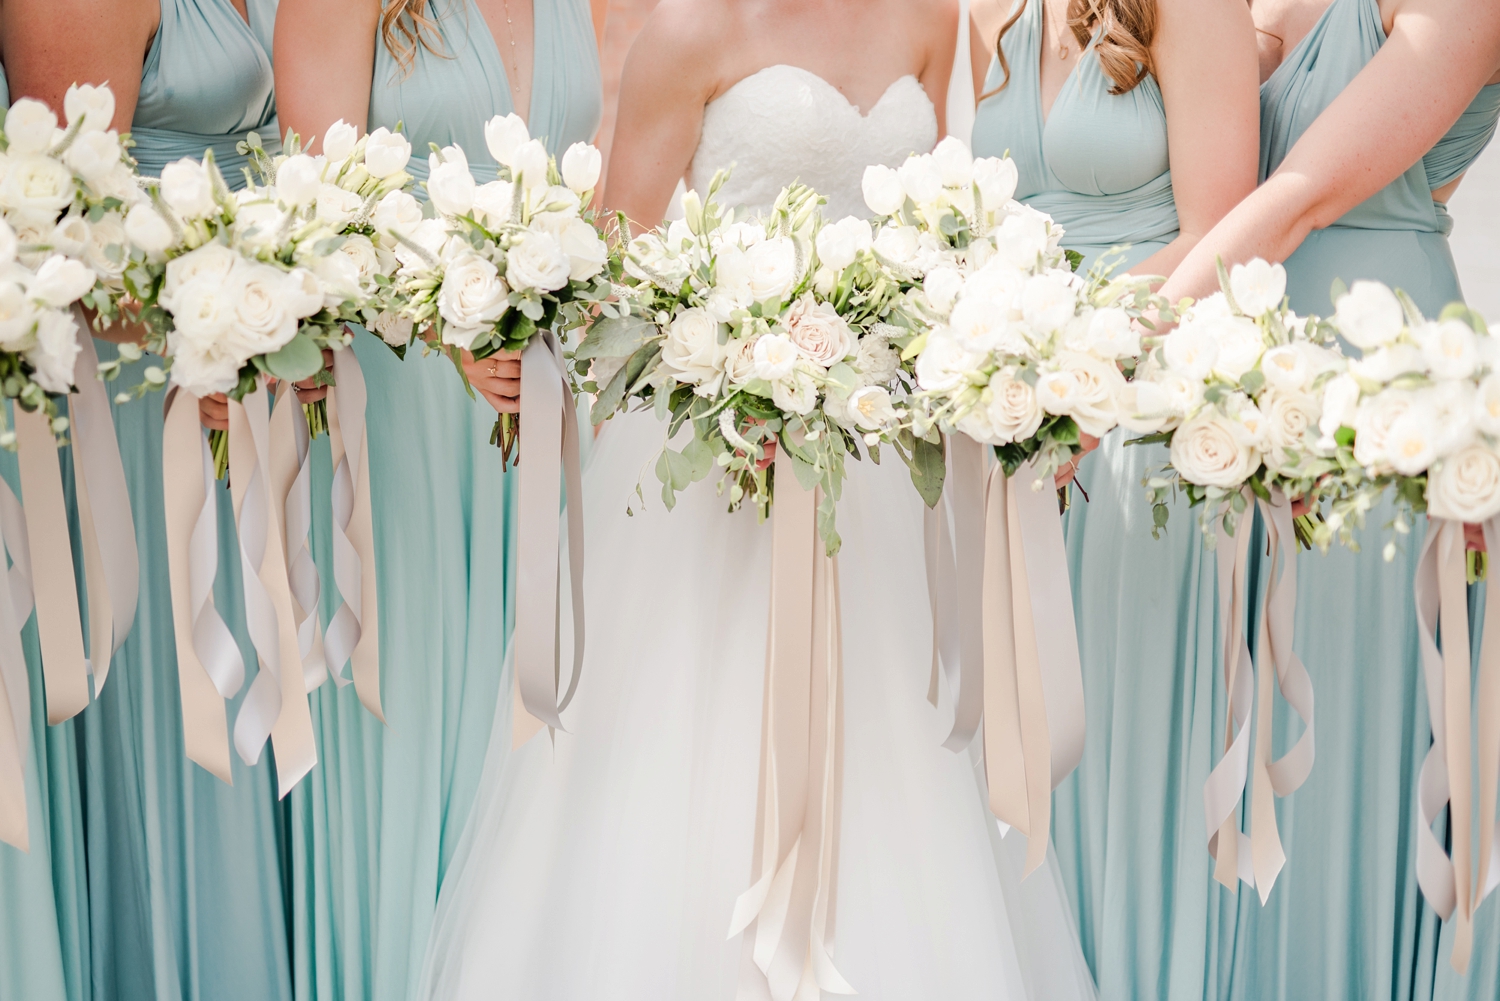 light-teal-bridesmaids-dresses-with-fluffy-white-bouquets-with-cream-ribbon